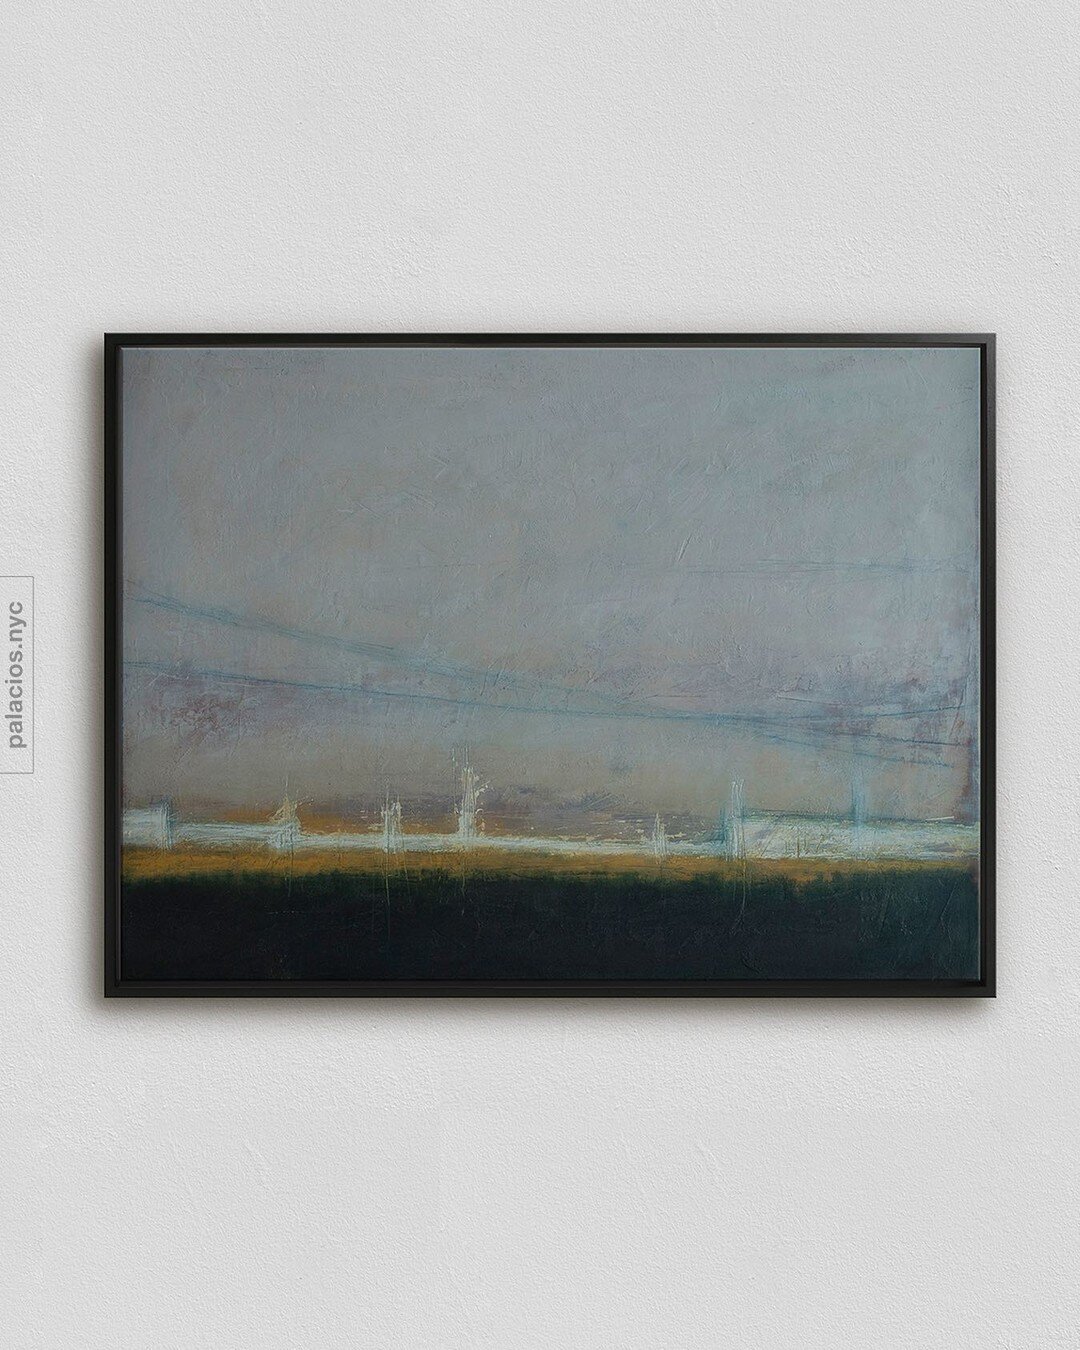 &lsquo;1994&rsquo;
Mixed media on wood
61 x 46cm

#abstractpainting #abstractlandscape #painting #artistsoninstagram #foggylandscape #mixedmedia